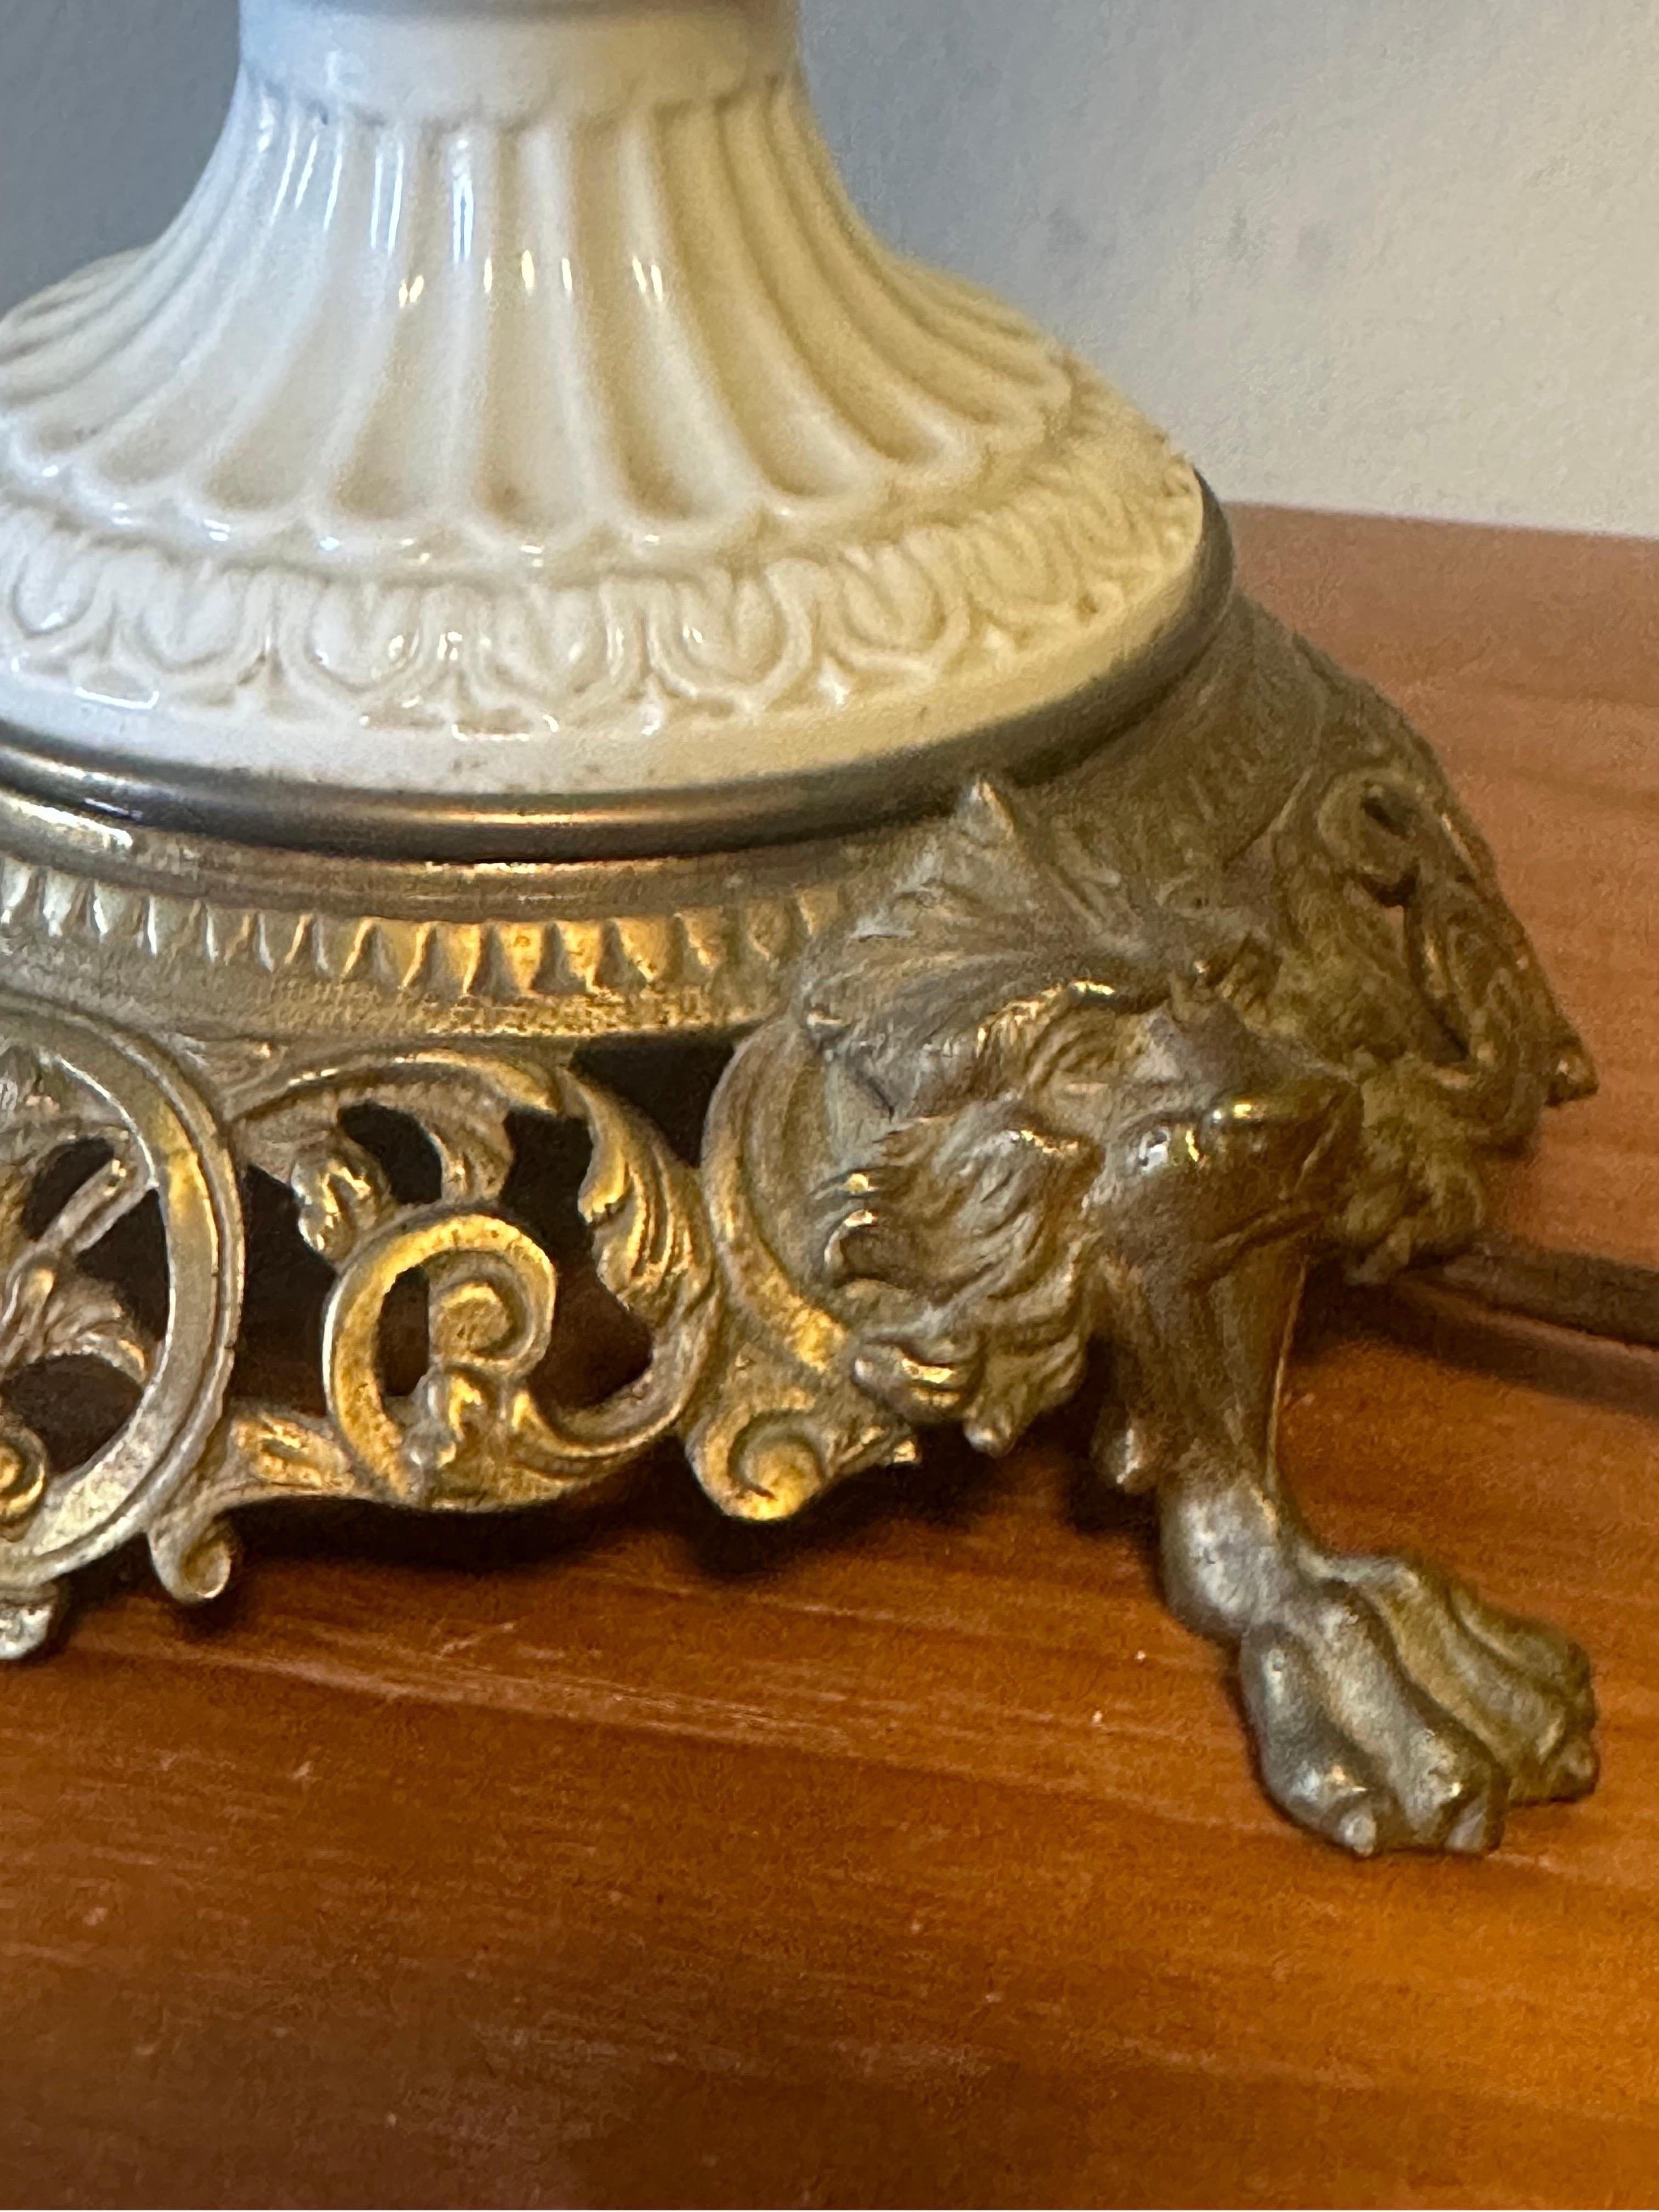 Exceptionally detailed down to the scales of the serpents, minimalist in its blanc-de-chine glaze, the details of snakes and neo classical ornamentation create a clever sleekness in its charm. Placed on an ornate brass lion and paw base. A wonderful